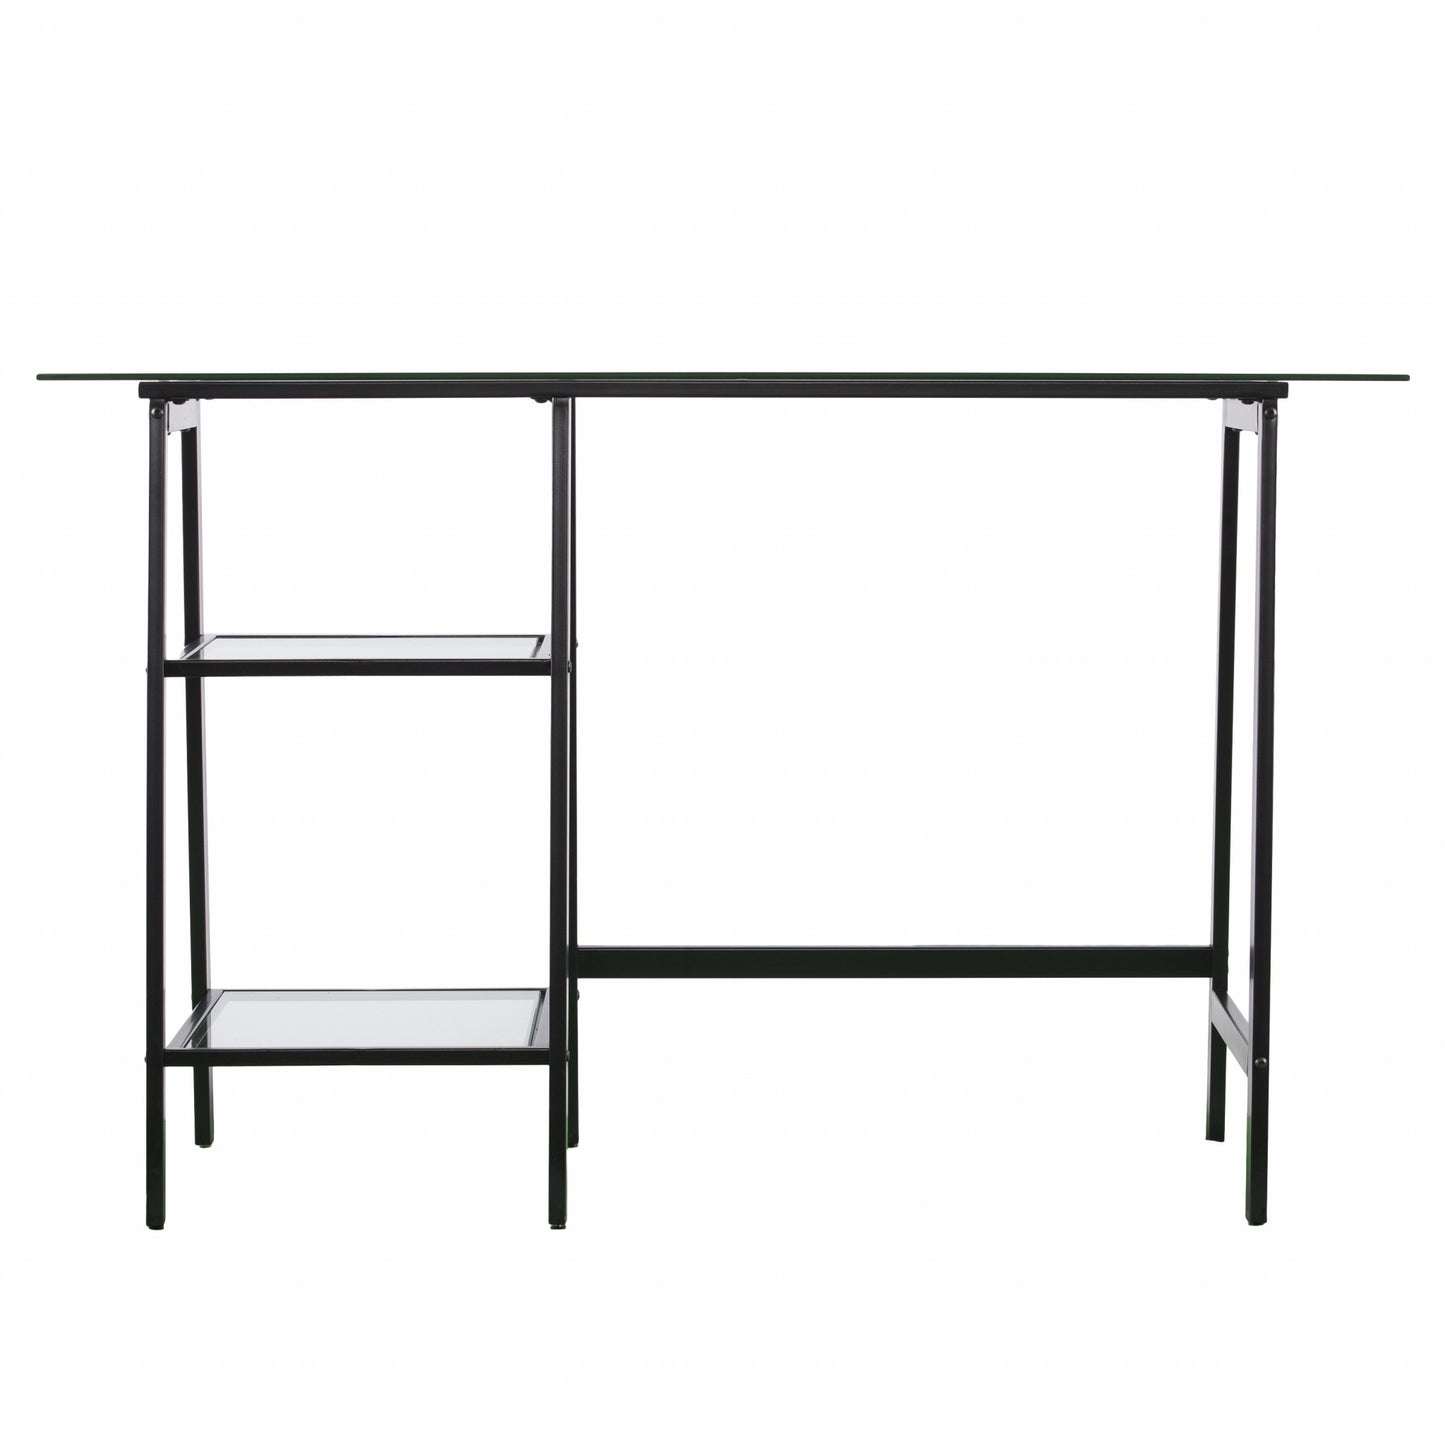 46" Clear And Black Glass Writing Desk